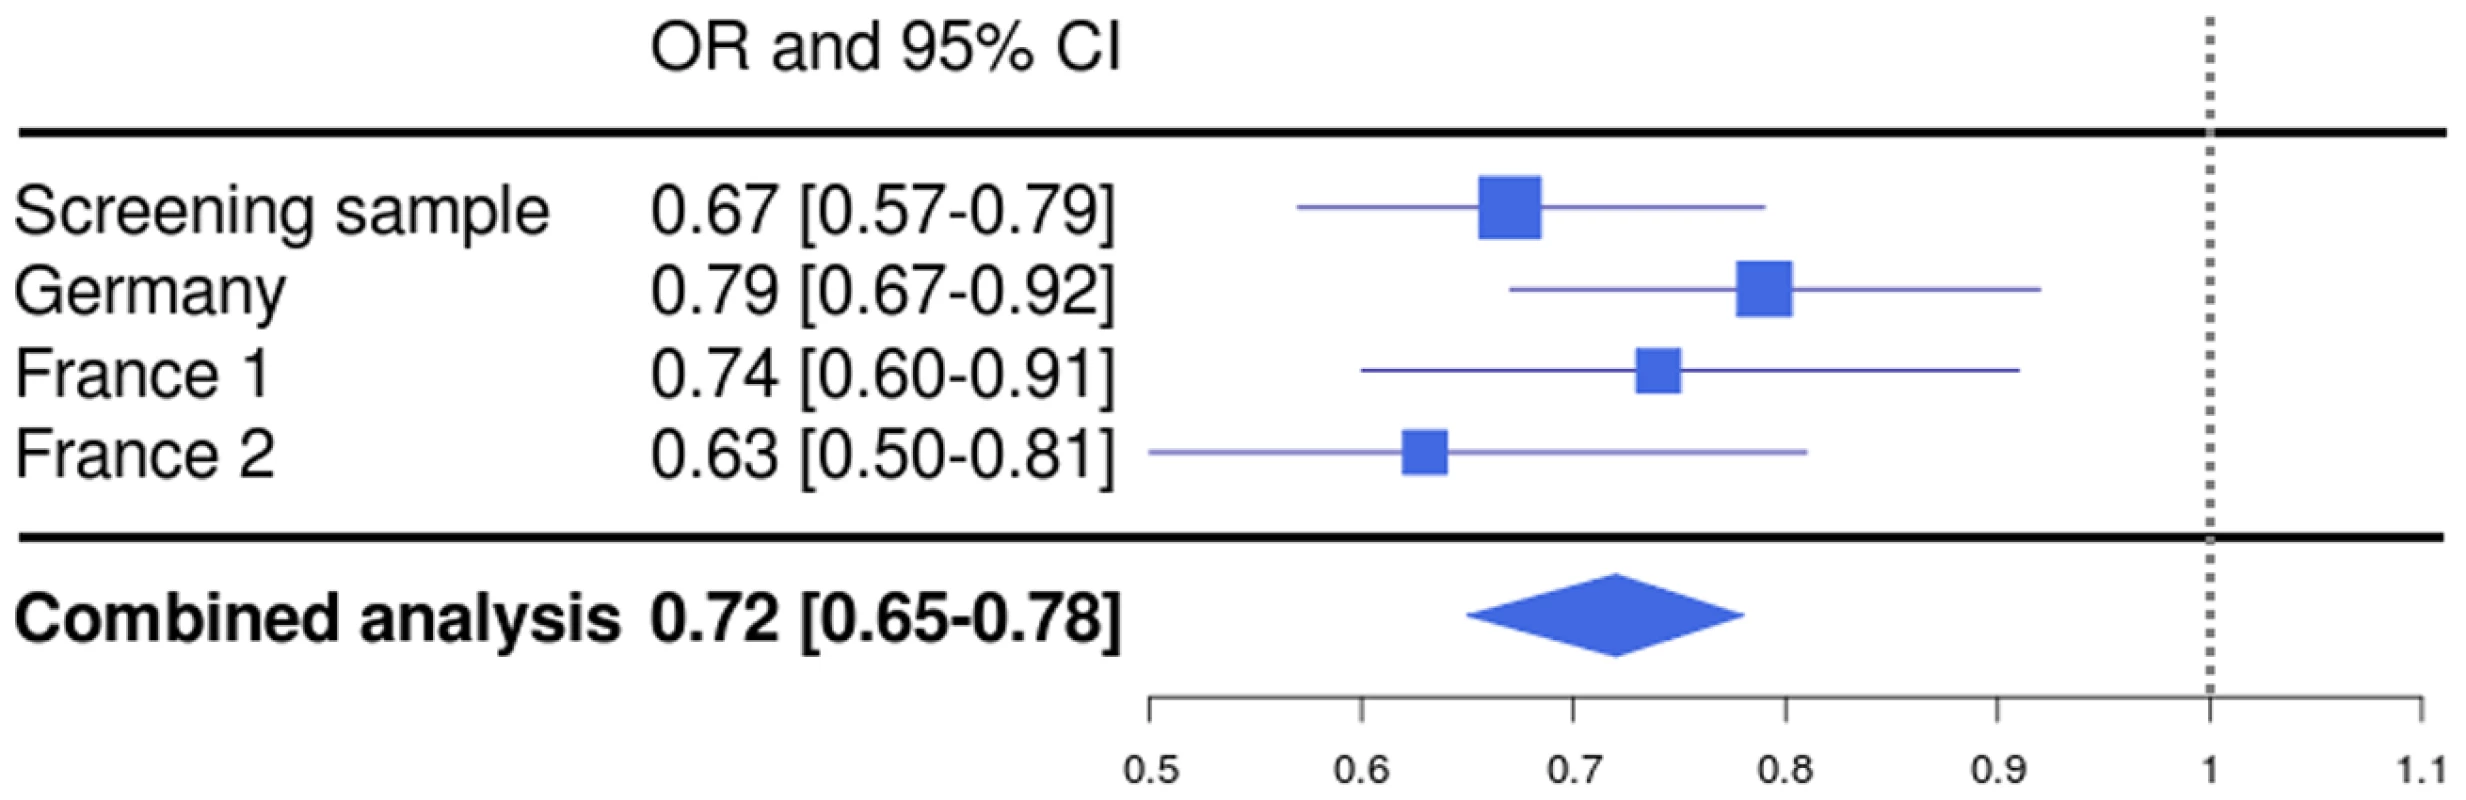 Forest plot for rs1739843 in initial screening sample (λ-corrected) and three replication samples (Germany, France 1, and France 2), together with results from the combined analysis.